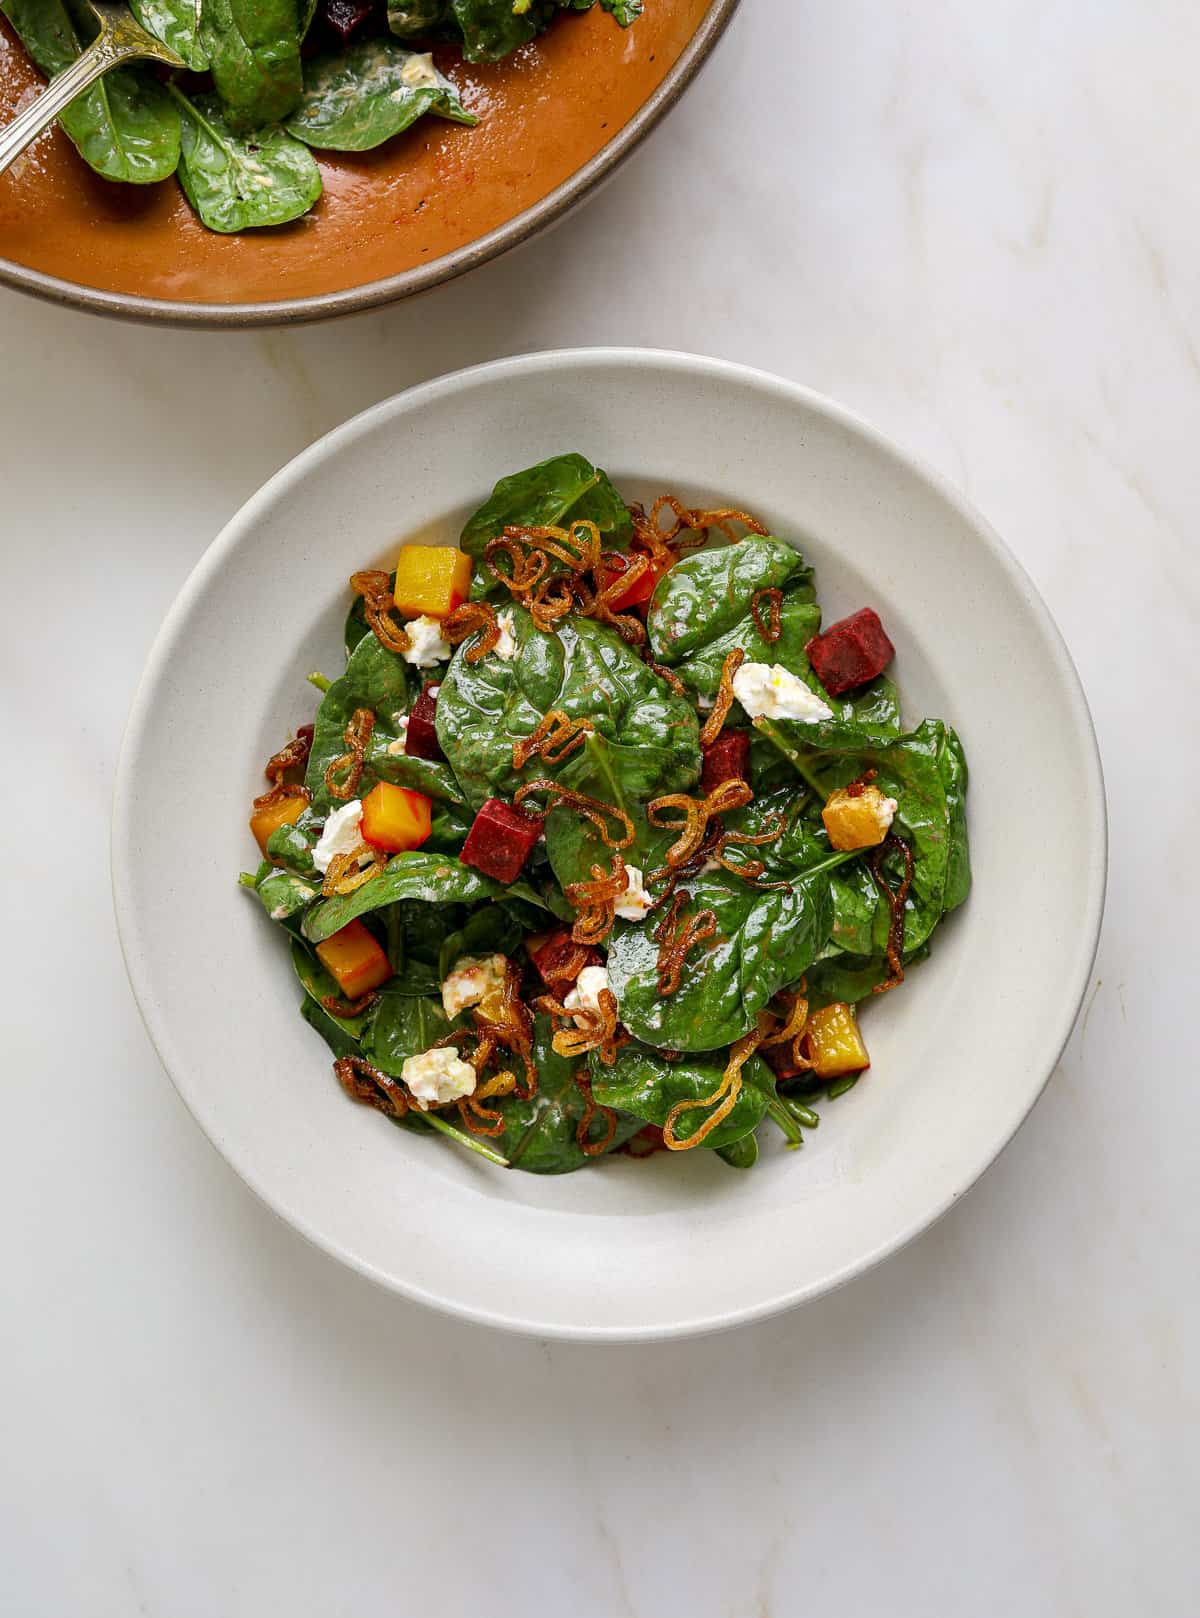 A white bowl filled with spinach salad, beets and goat cheese.